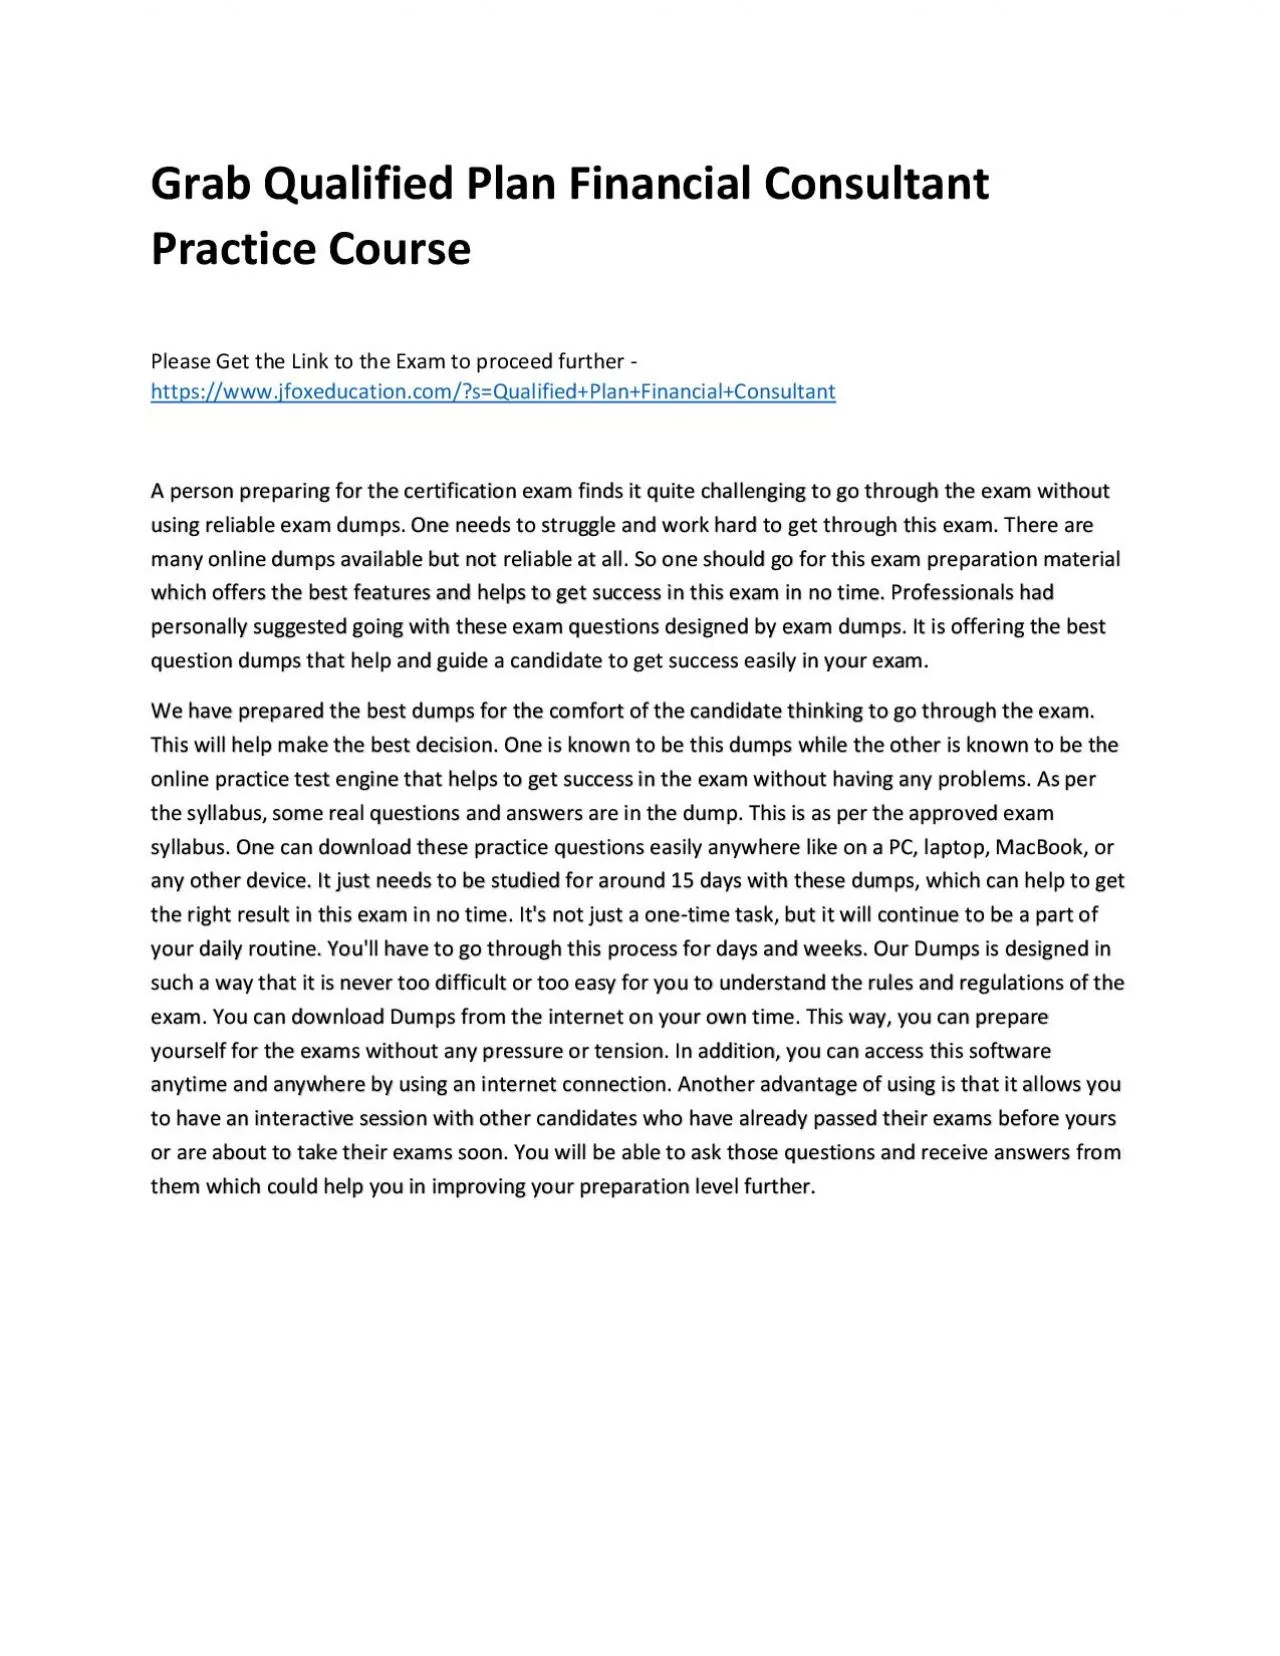 Grab Qualified Plan Financial Consultant Practice Course